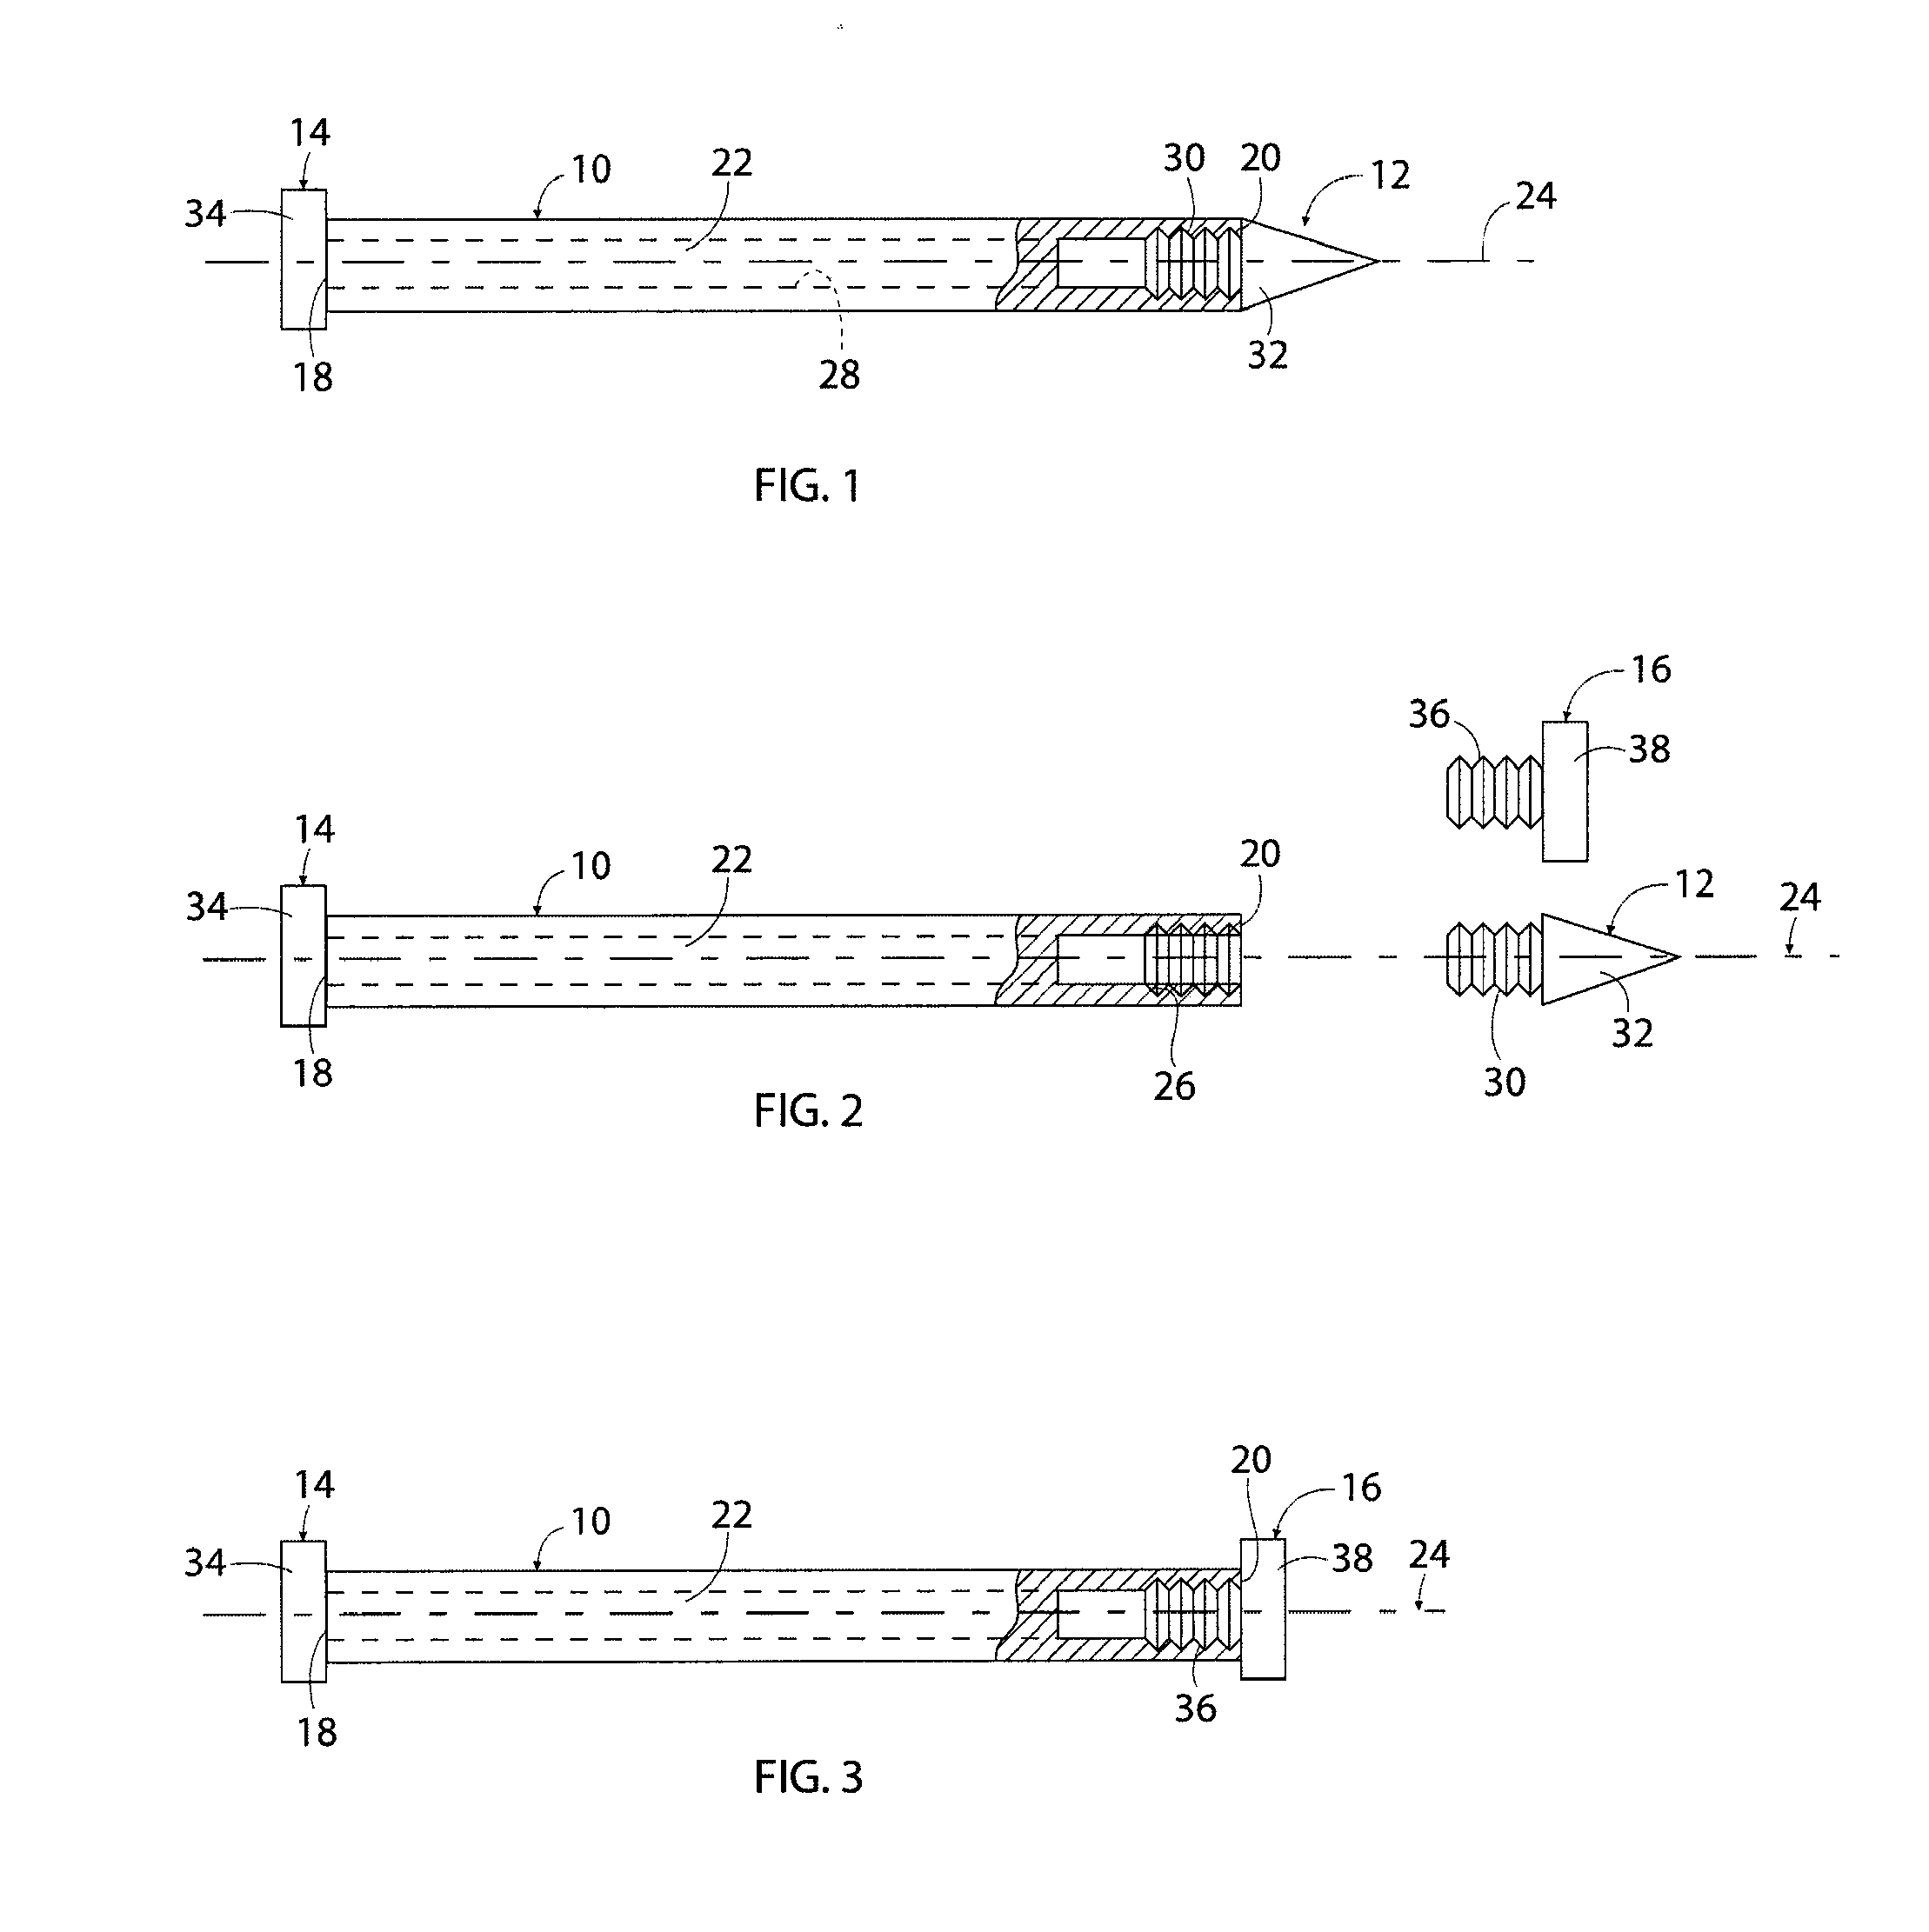 Bone Bolt Assembly for Attaching Supporting Implants to Bones, for Holding Multiple Bones in Relative Positions, and for Holding Together Fractured Bone Fragments